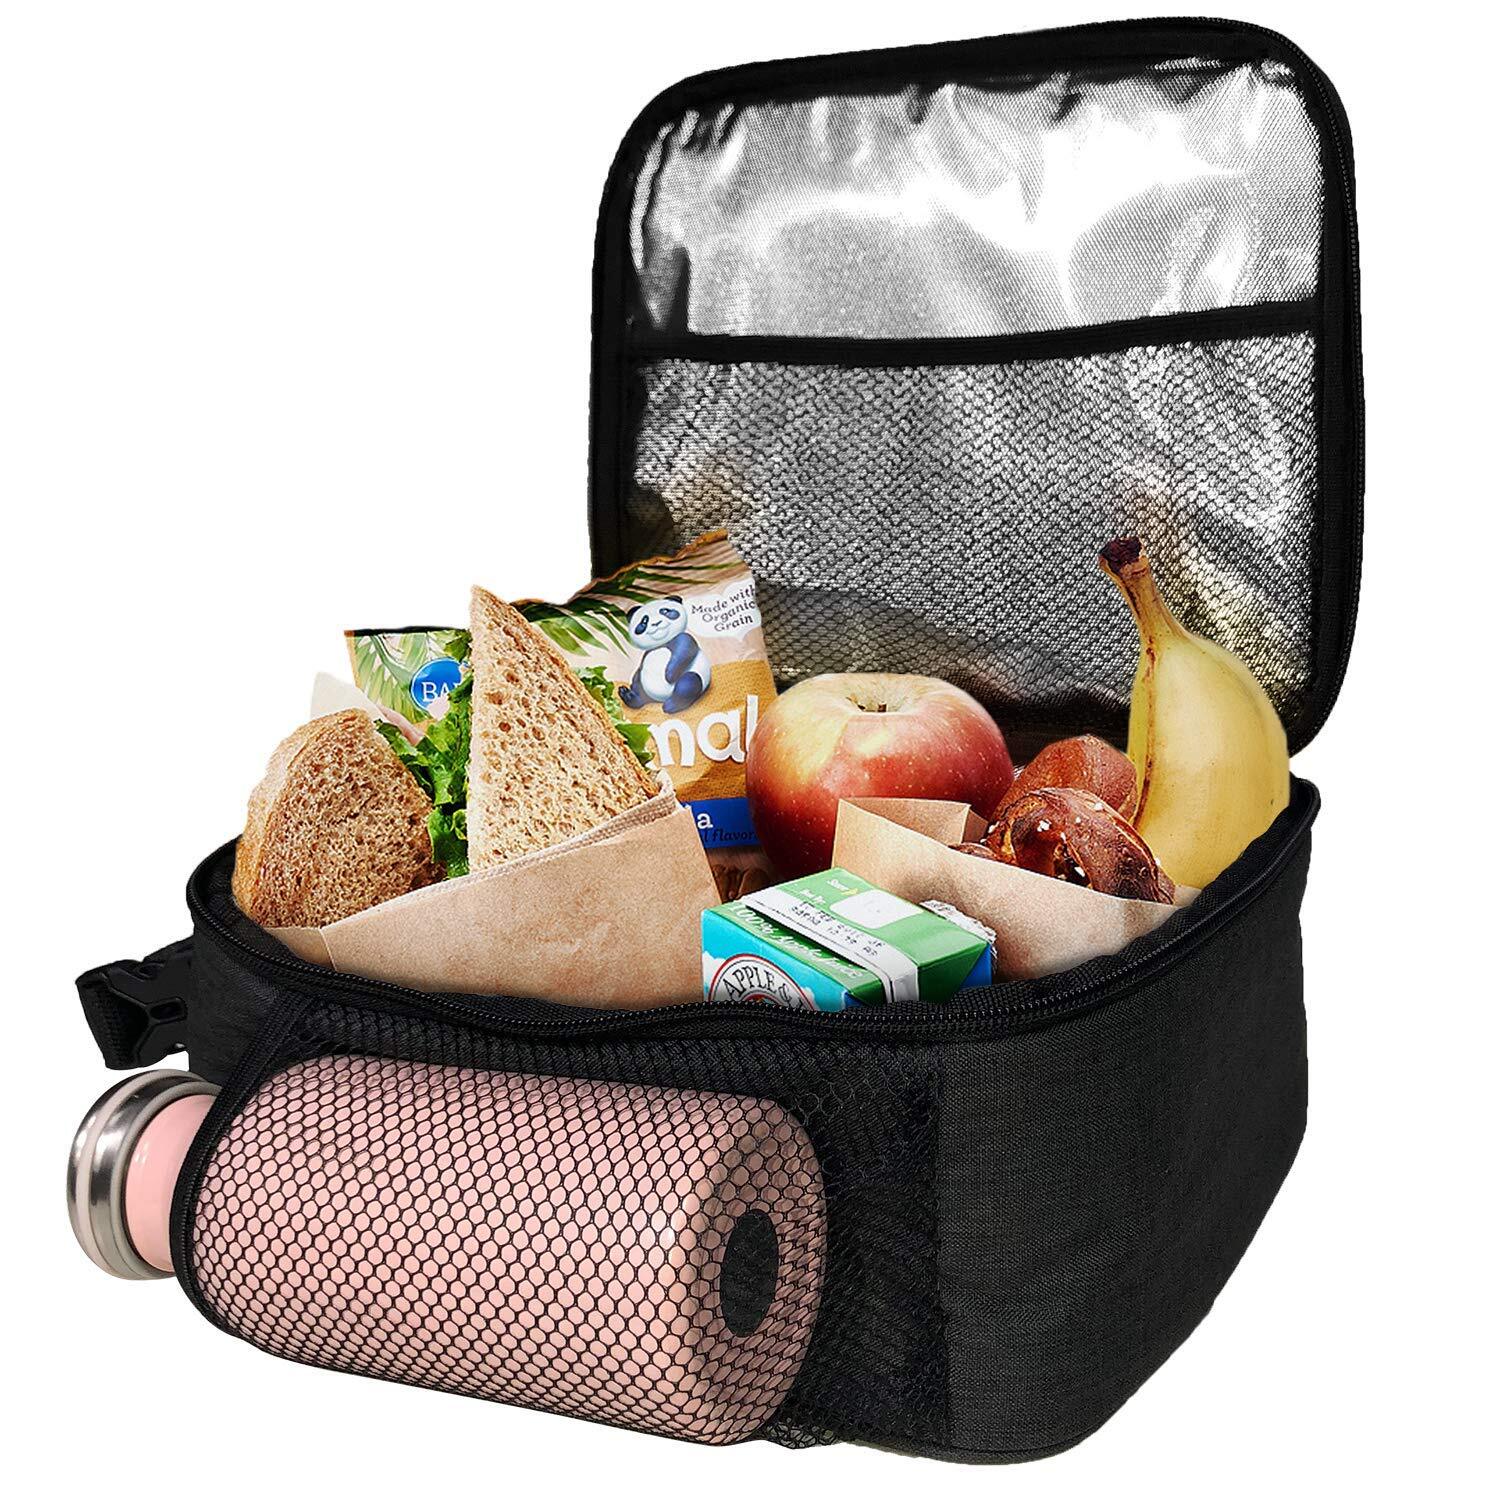 https://images.51microshop.com/1658/product/20180927/Hap_Tim_Insulated_Lunch_Bag_Women_Girls_Reusable_Lunch_Box_Kids_Girls_Spacious_Lunchbox_Adult_Cooler_Bag_18654_PK__1538012501068_4.jpg